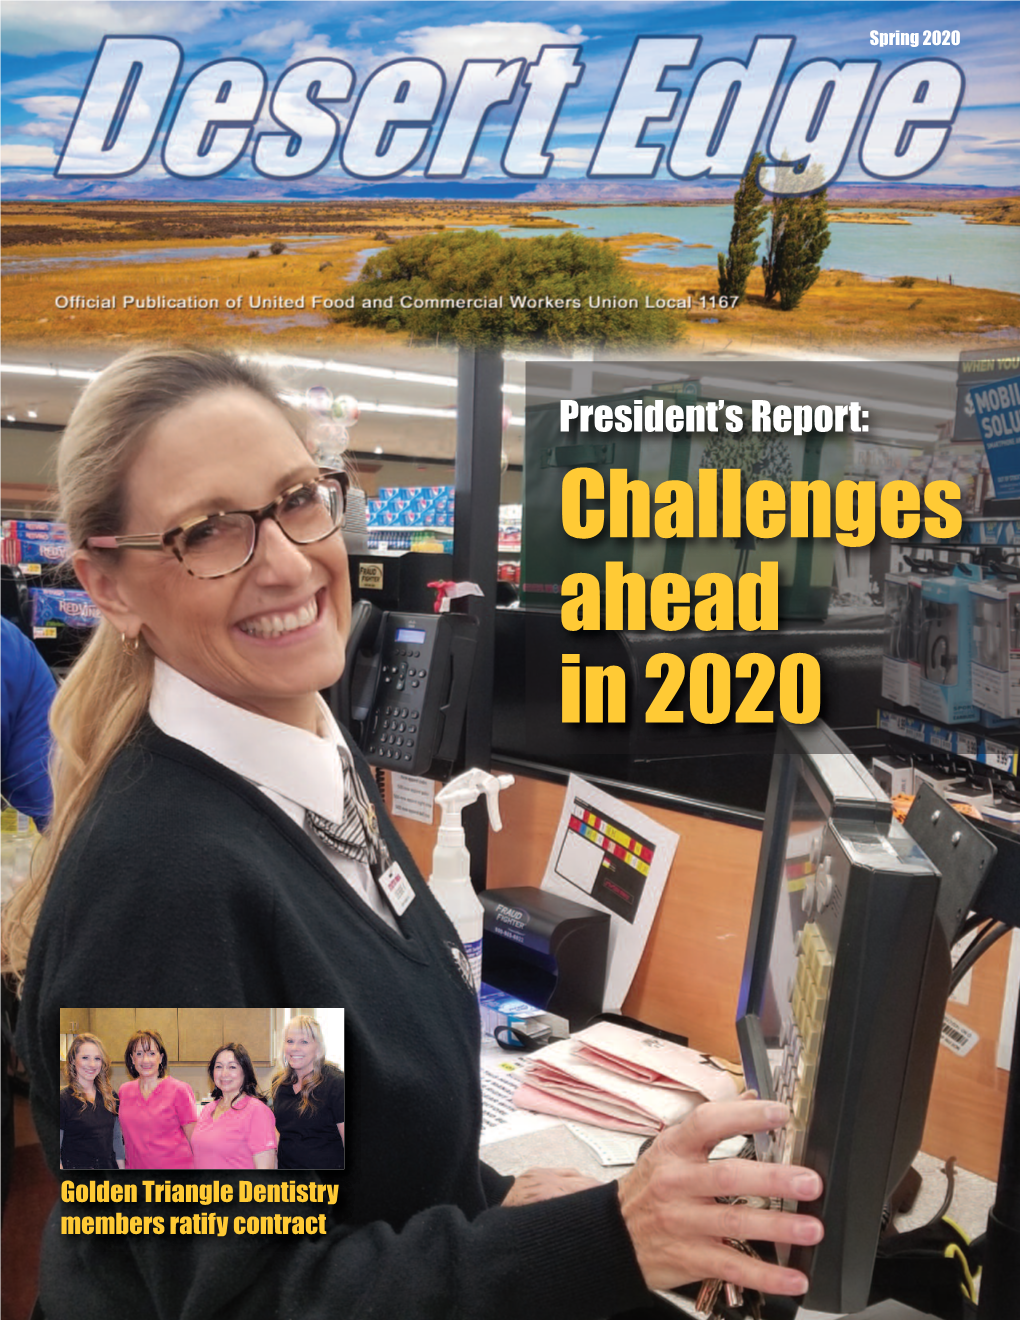 Challenges Ahead in 2020